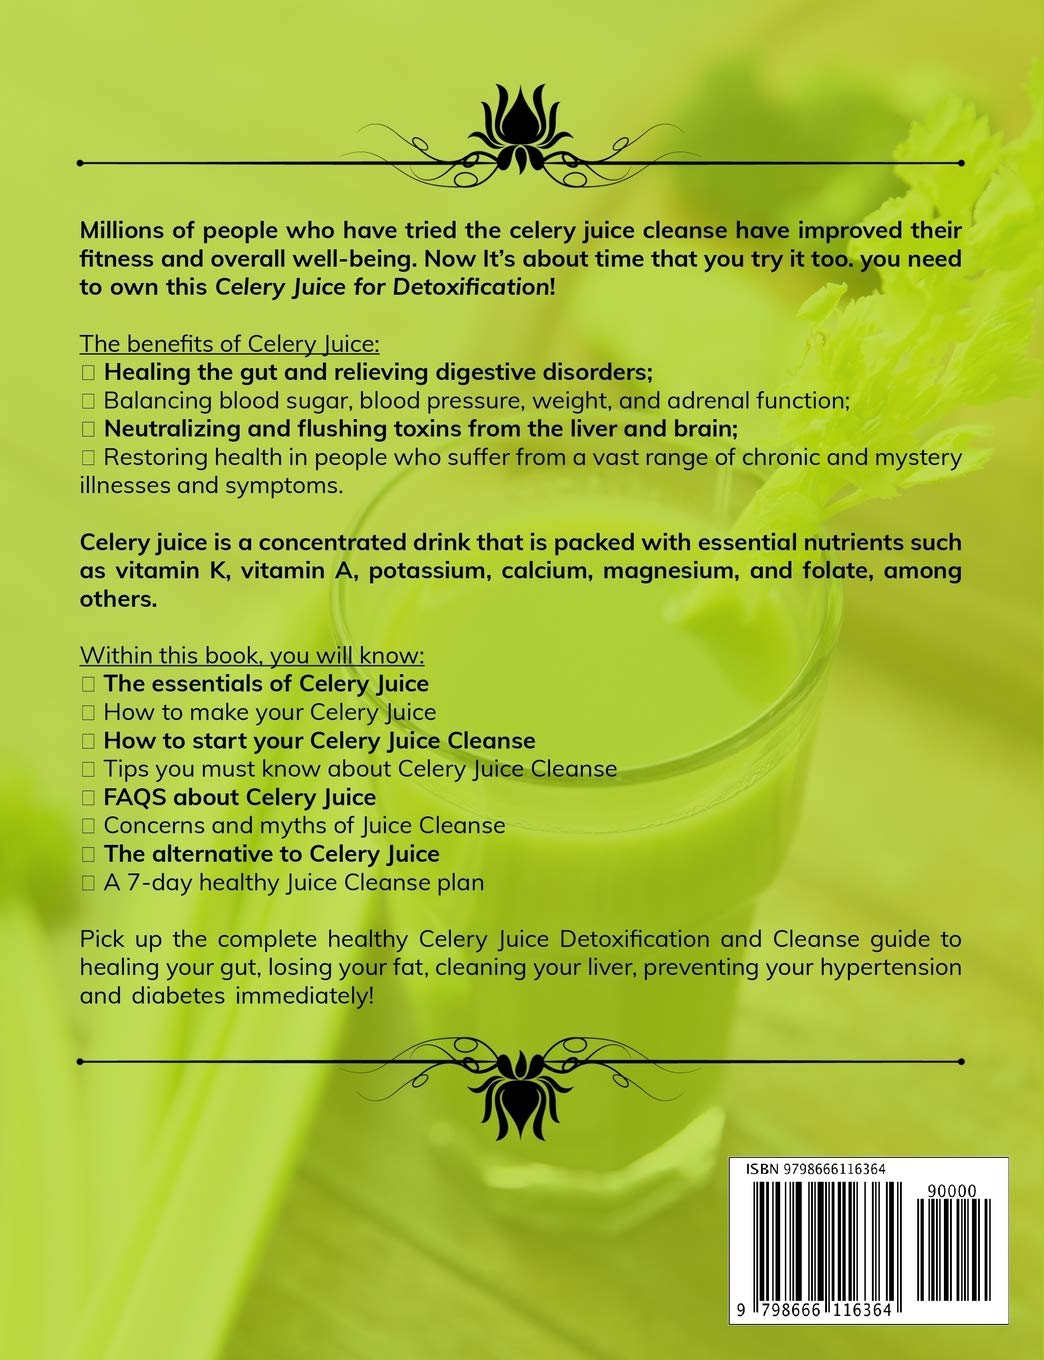 Celery Juice for Detoxification: The Simplest Operational Guide in 7 Days to Heal the Gut, Lose Fat, Cleanse the Liver, Prevent Hypertension, Alleviate Diabetes and More